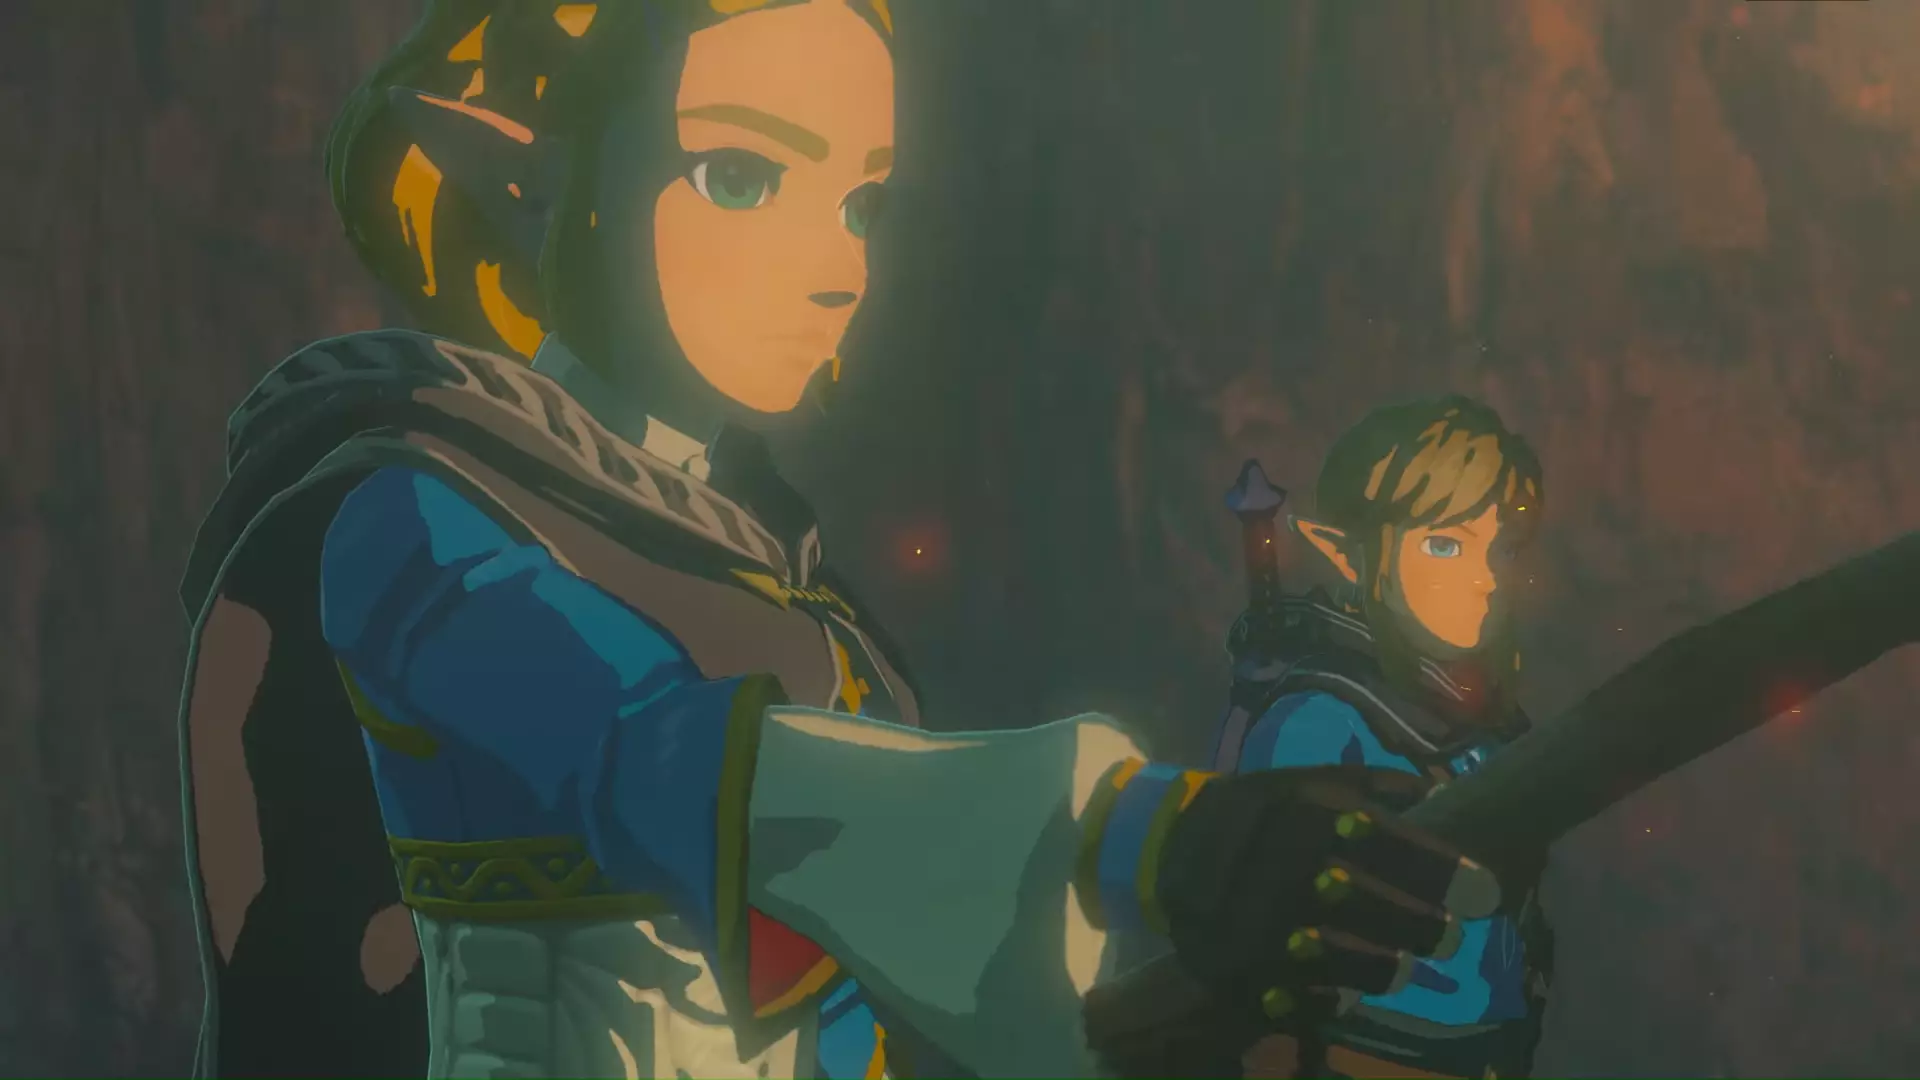 All we've seen of the 'Breath of the Wild' sequel so far is one teaser trailer /